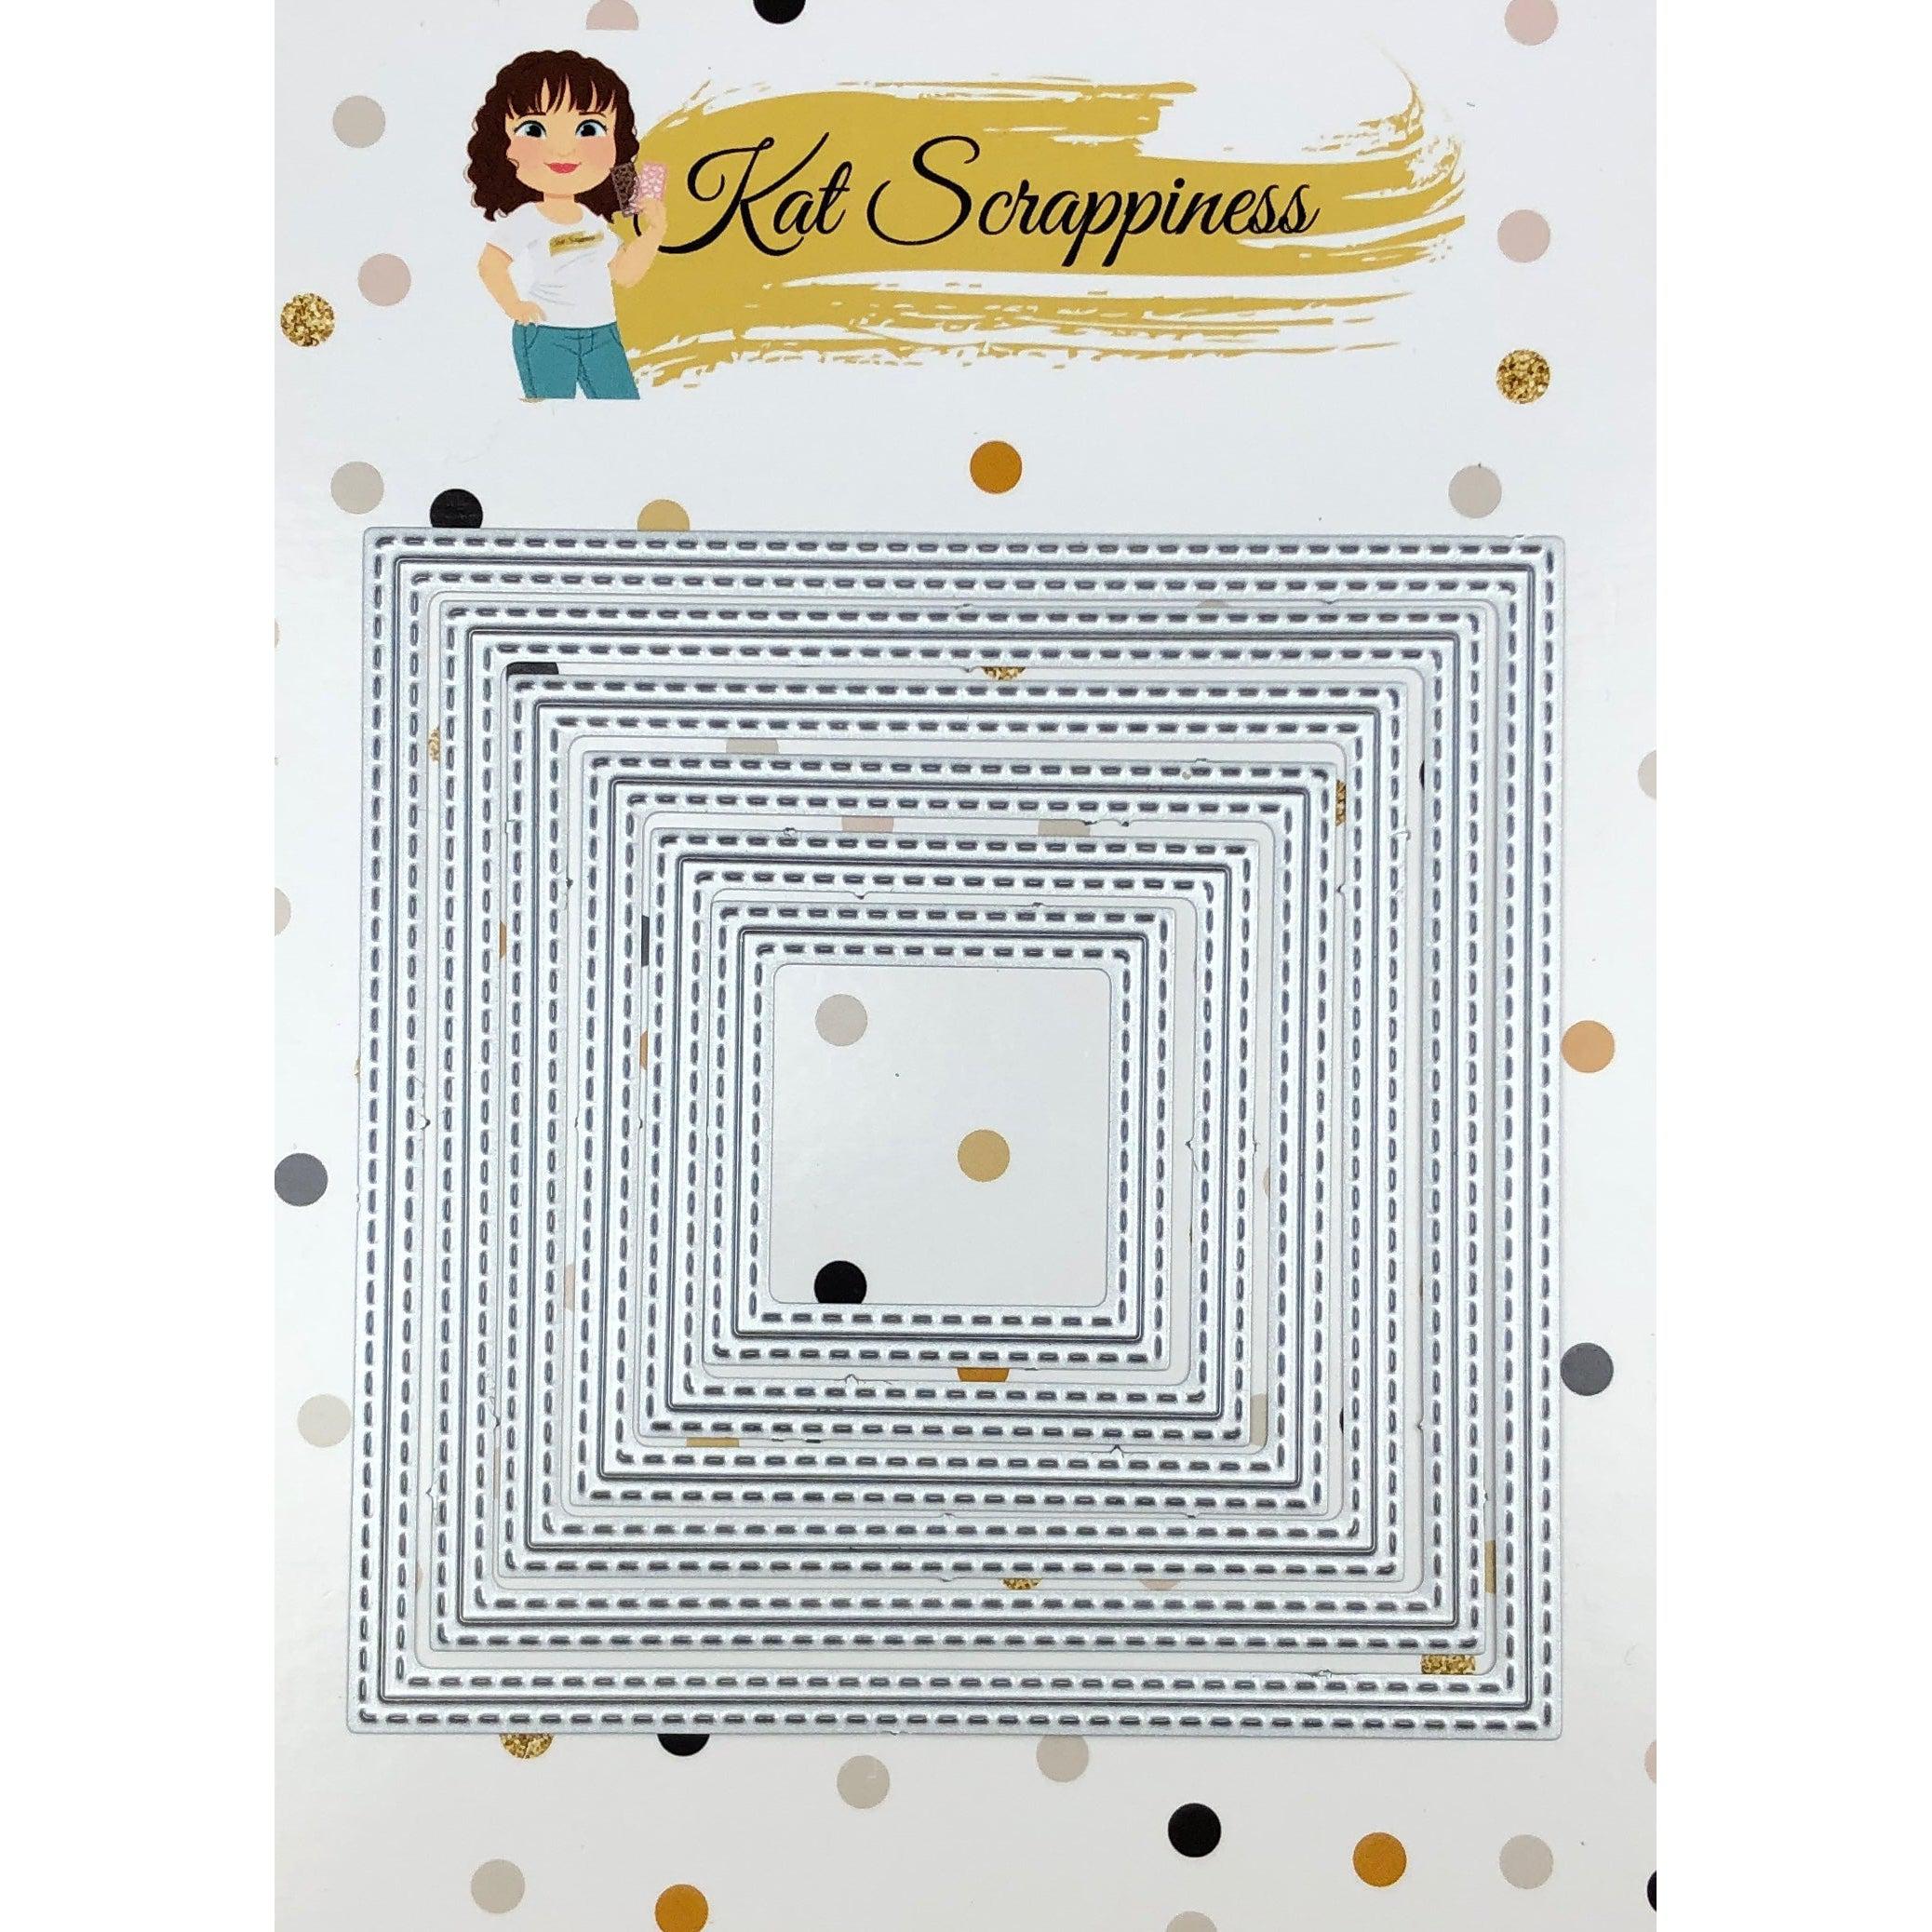 American Crafts Embossed Specialty Paper 8.5X11 - White - Kat Scrappiness